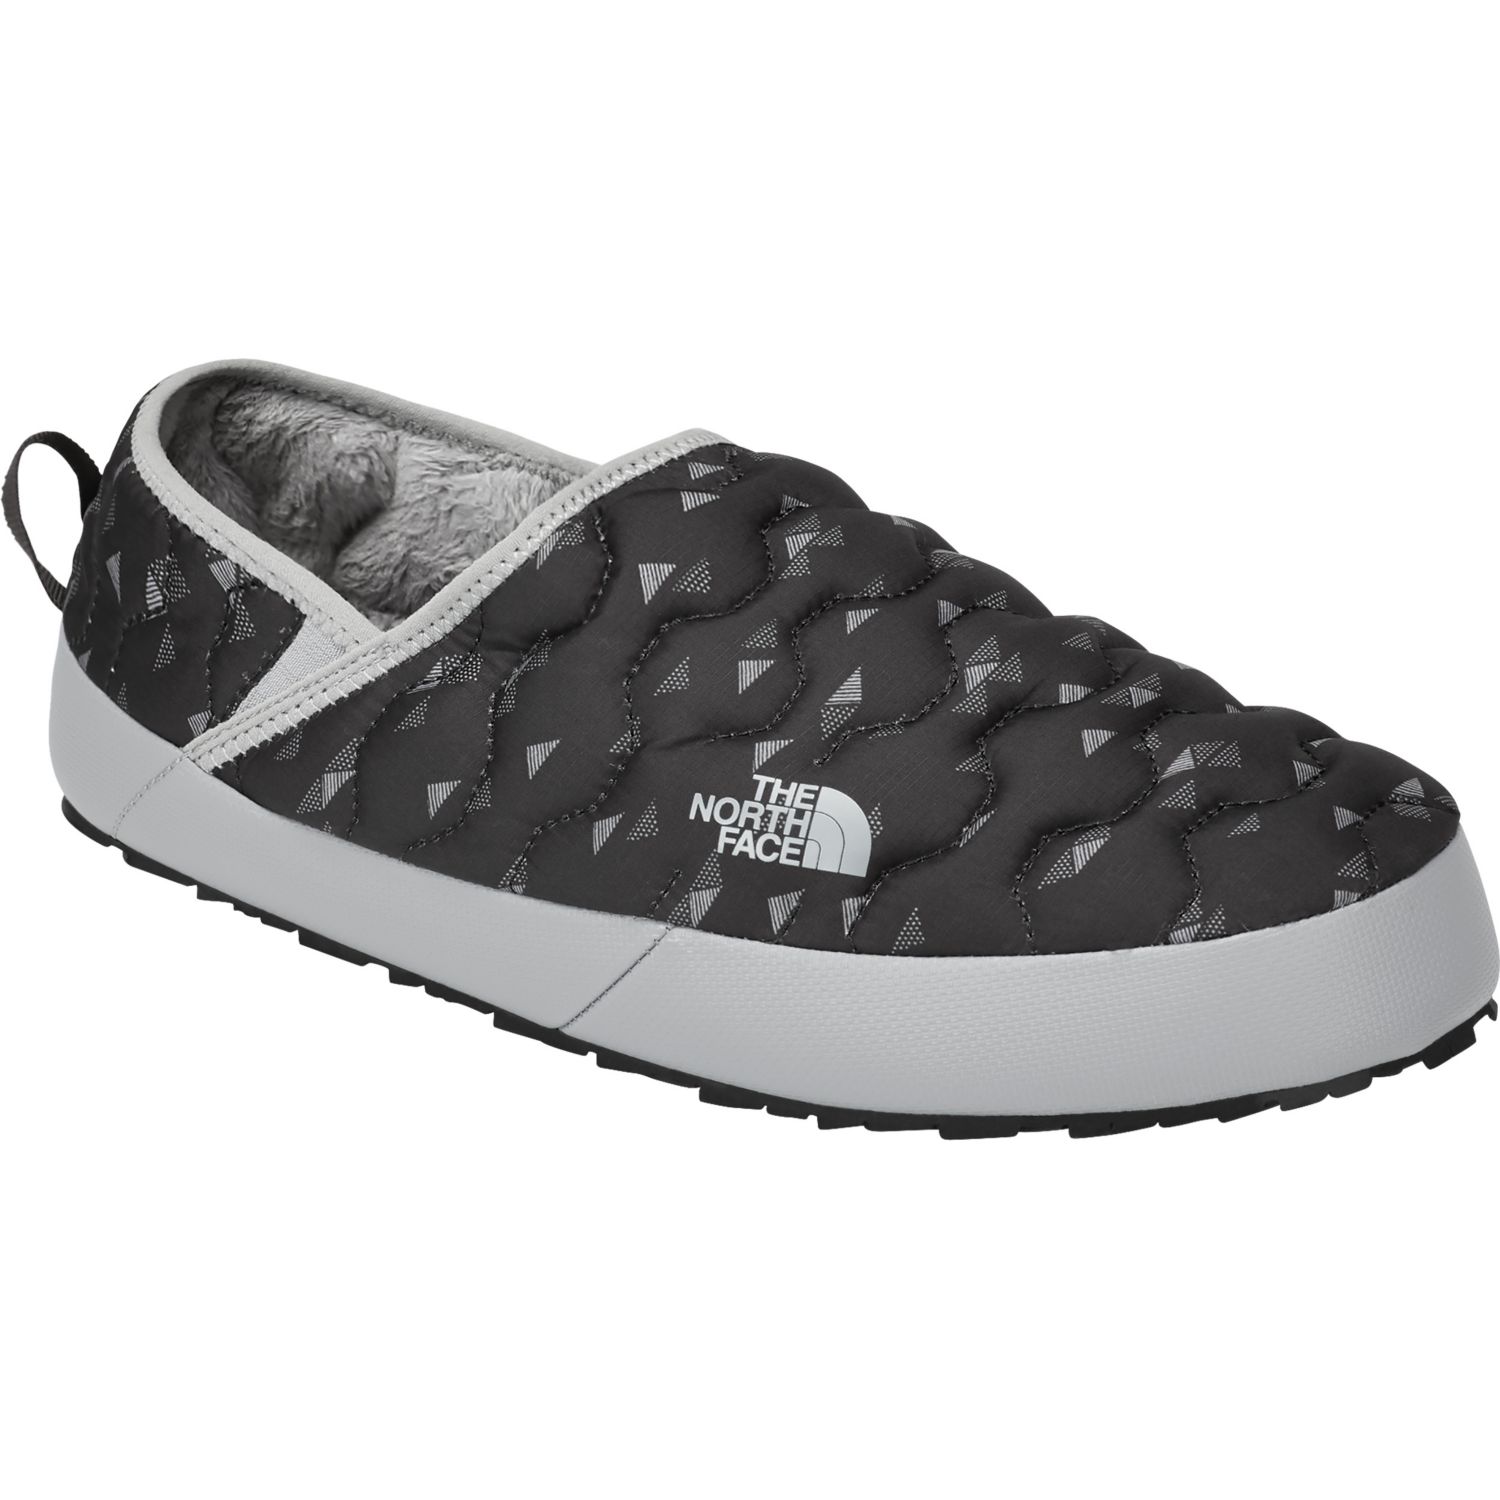 the north face women's thermoball traction mule iv